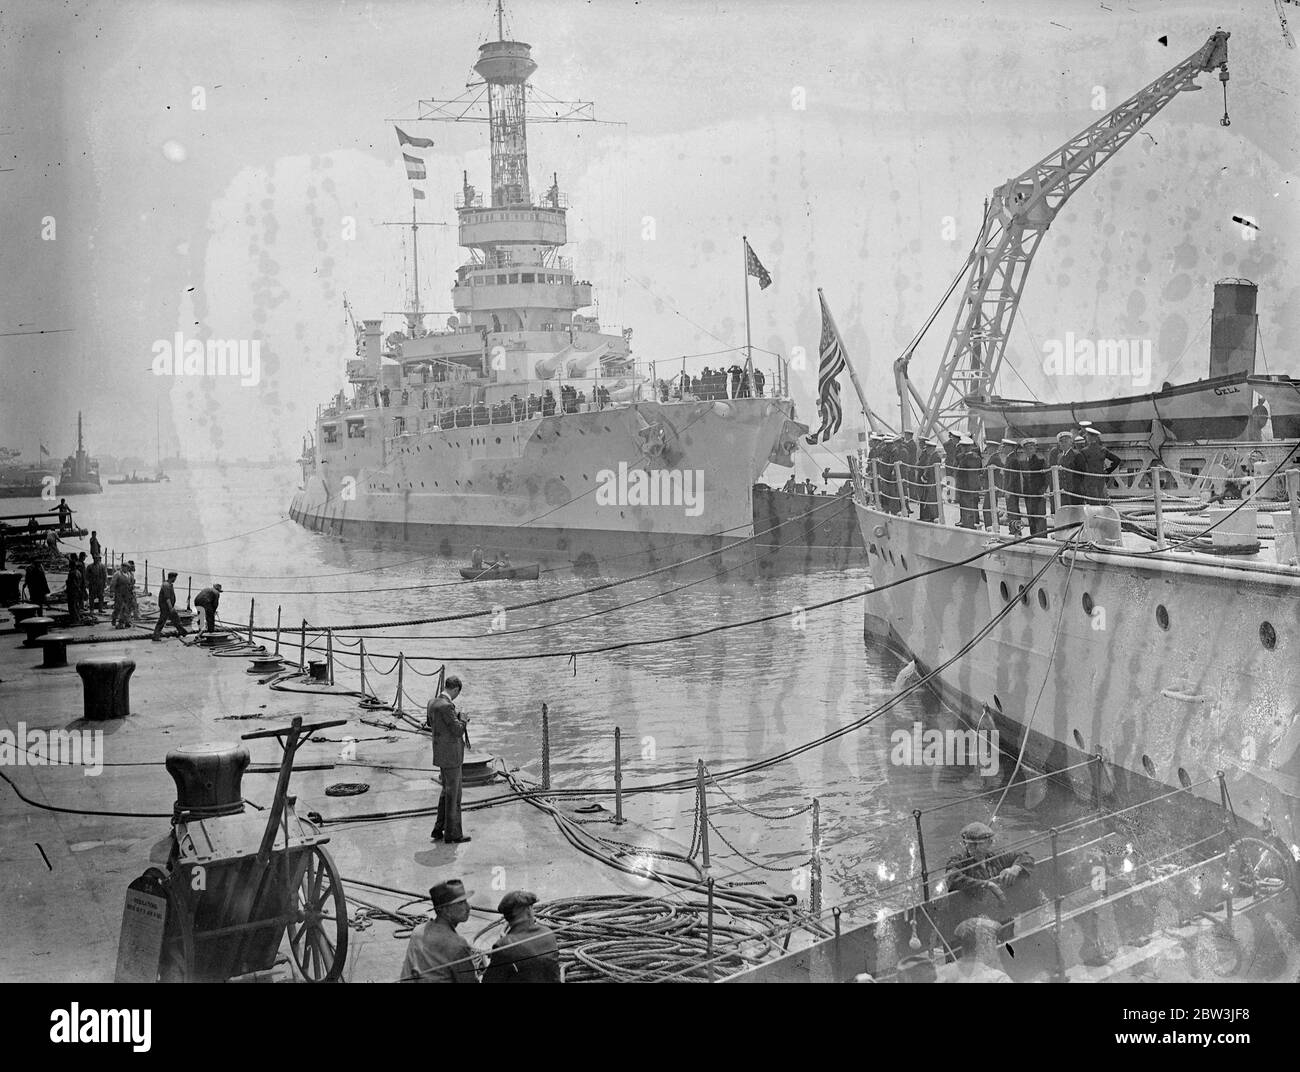 American battleship arrives at Portsmouth for a visit . The USS Oklahoma ( BB - 37 ) arrived at Porstmouth for a visit . The Oklahoma is usedas a training ship for mid shhipmen of the Naval Academy . She was in the division commanded by Rear Admiral T S Rodgers which during the war was sent to Berehaven as an additional guard for the American troop convoys in the Atlantic . Two other battleships , the USS Arkansas ( BB-33 ) and the USS Wyoming ( BB-32 ) , which also served in British waters during the war in the Grand Fleet and the USS Wyoming ( BB-32 ) , are to visit Portsmouth as well . Phot Stock Photo